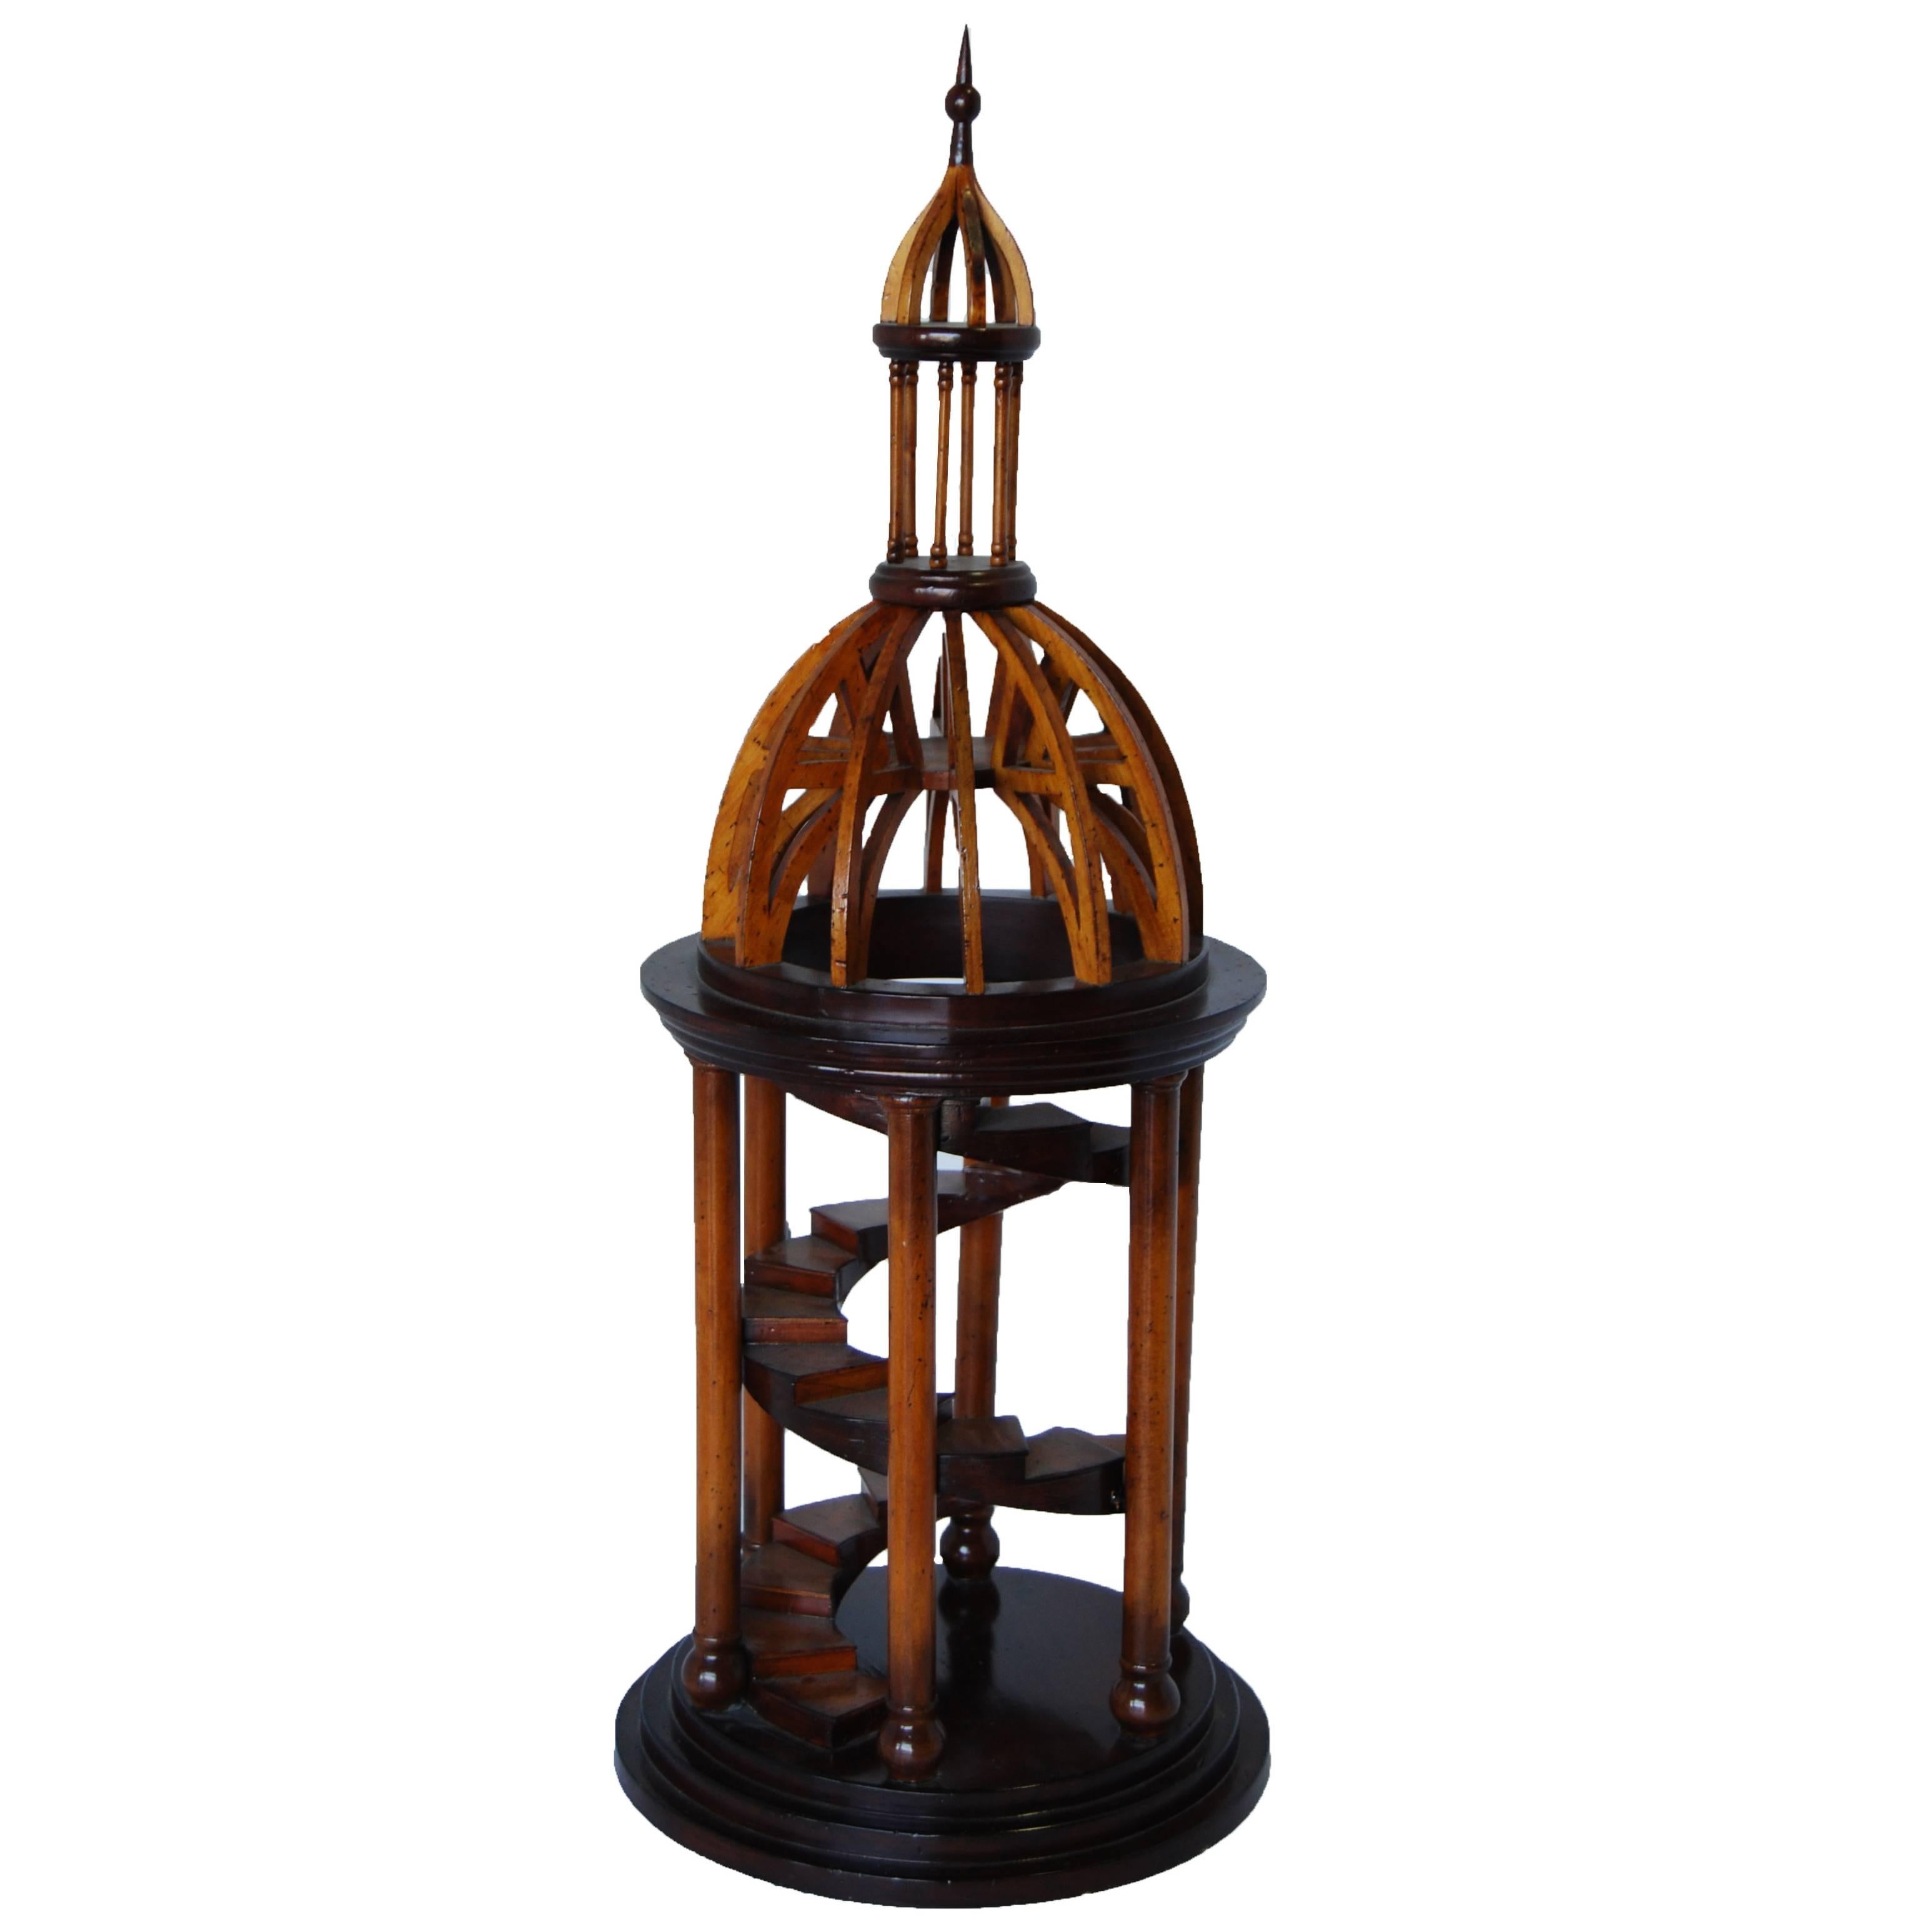 Carved Wood Bell Tower Model For Sale